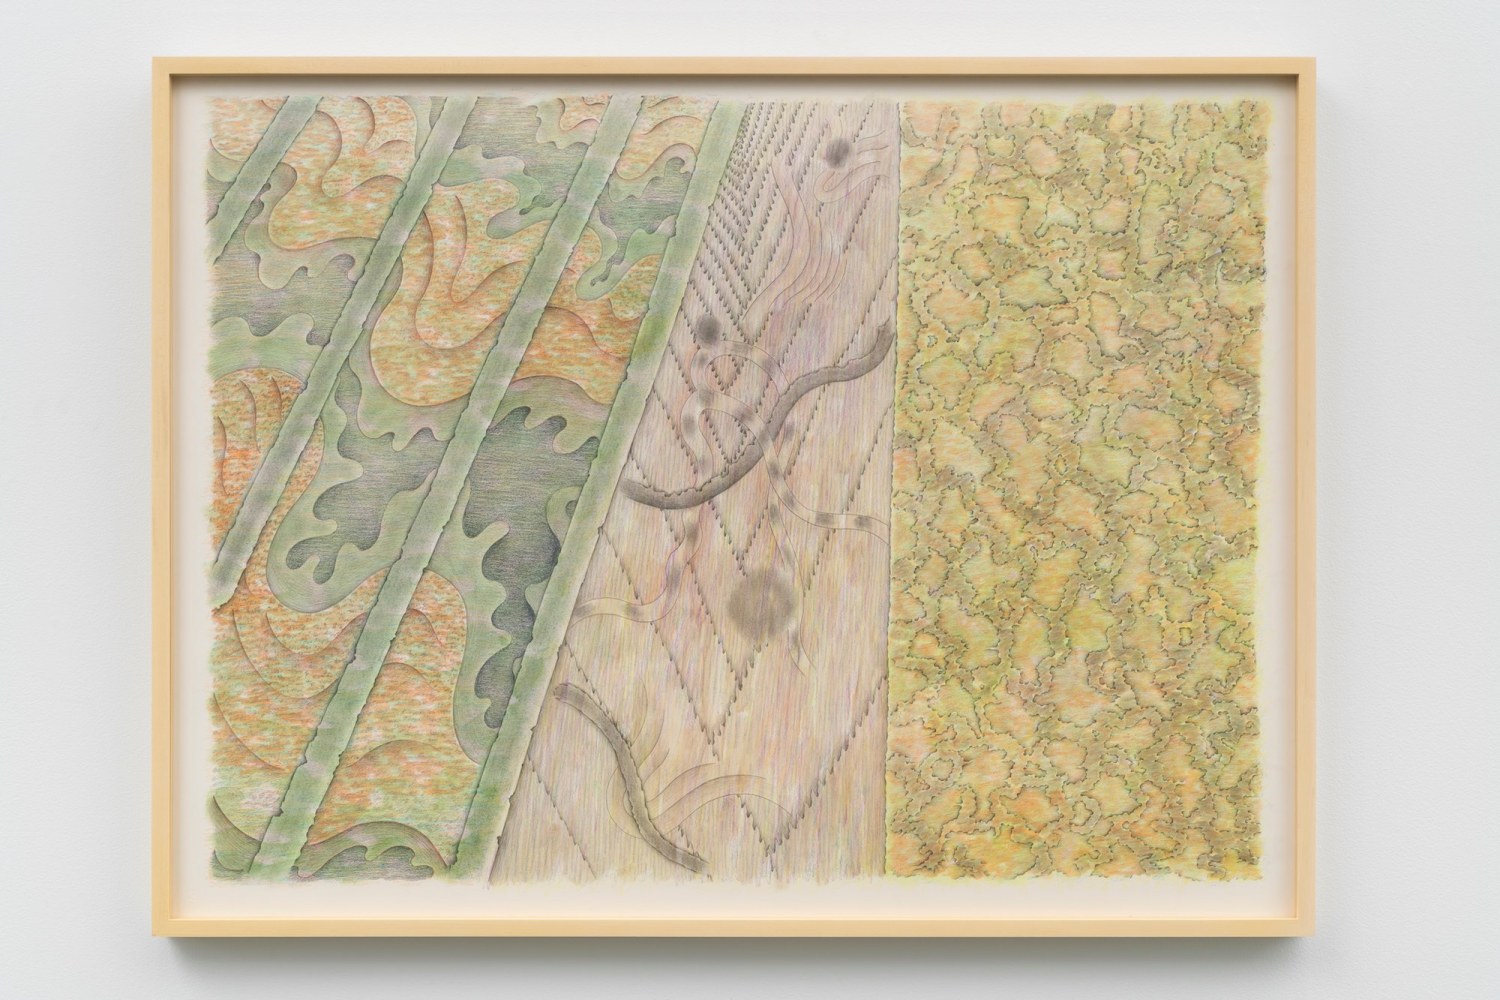 Evelyn Statsinger
Aerial Coves, 1984
Graphite, pastel and colored pencil on paper
30 &amp;times; 40 in.
(76.2 &amp;times; 101.6 cm)